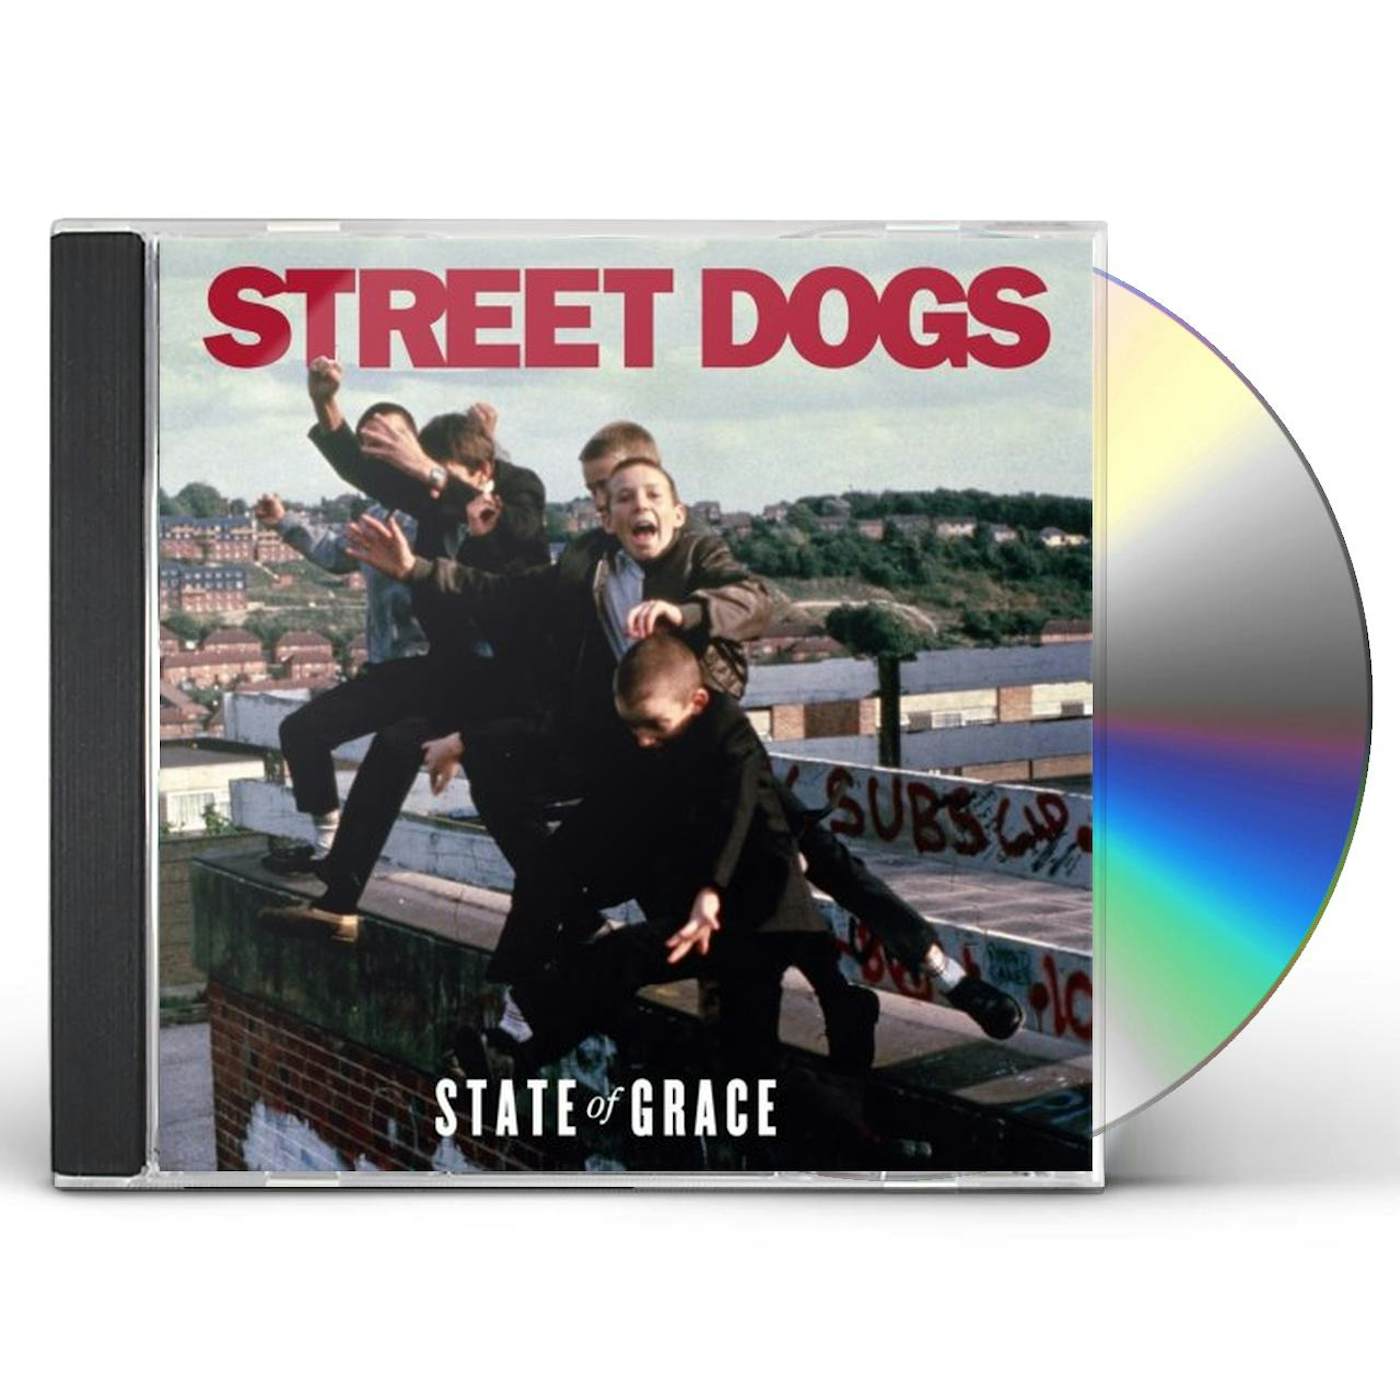 Street Dogs STATE OF GRACE CD